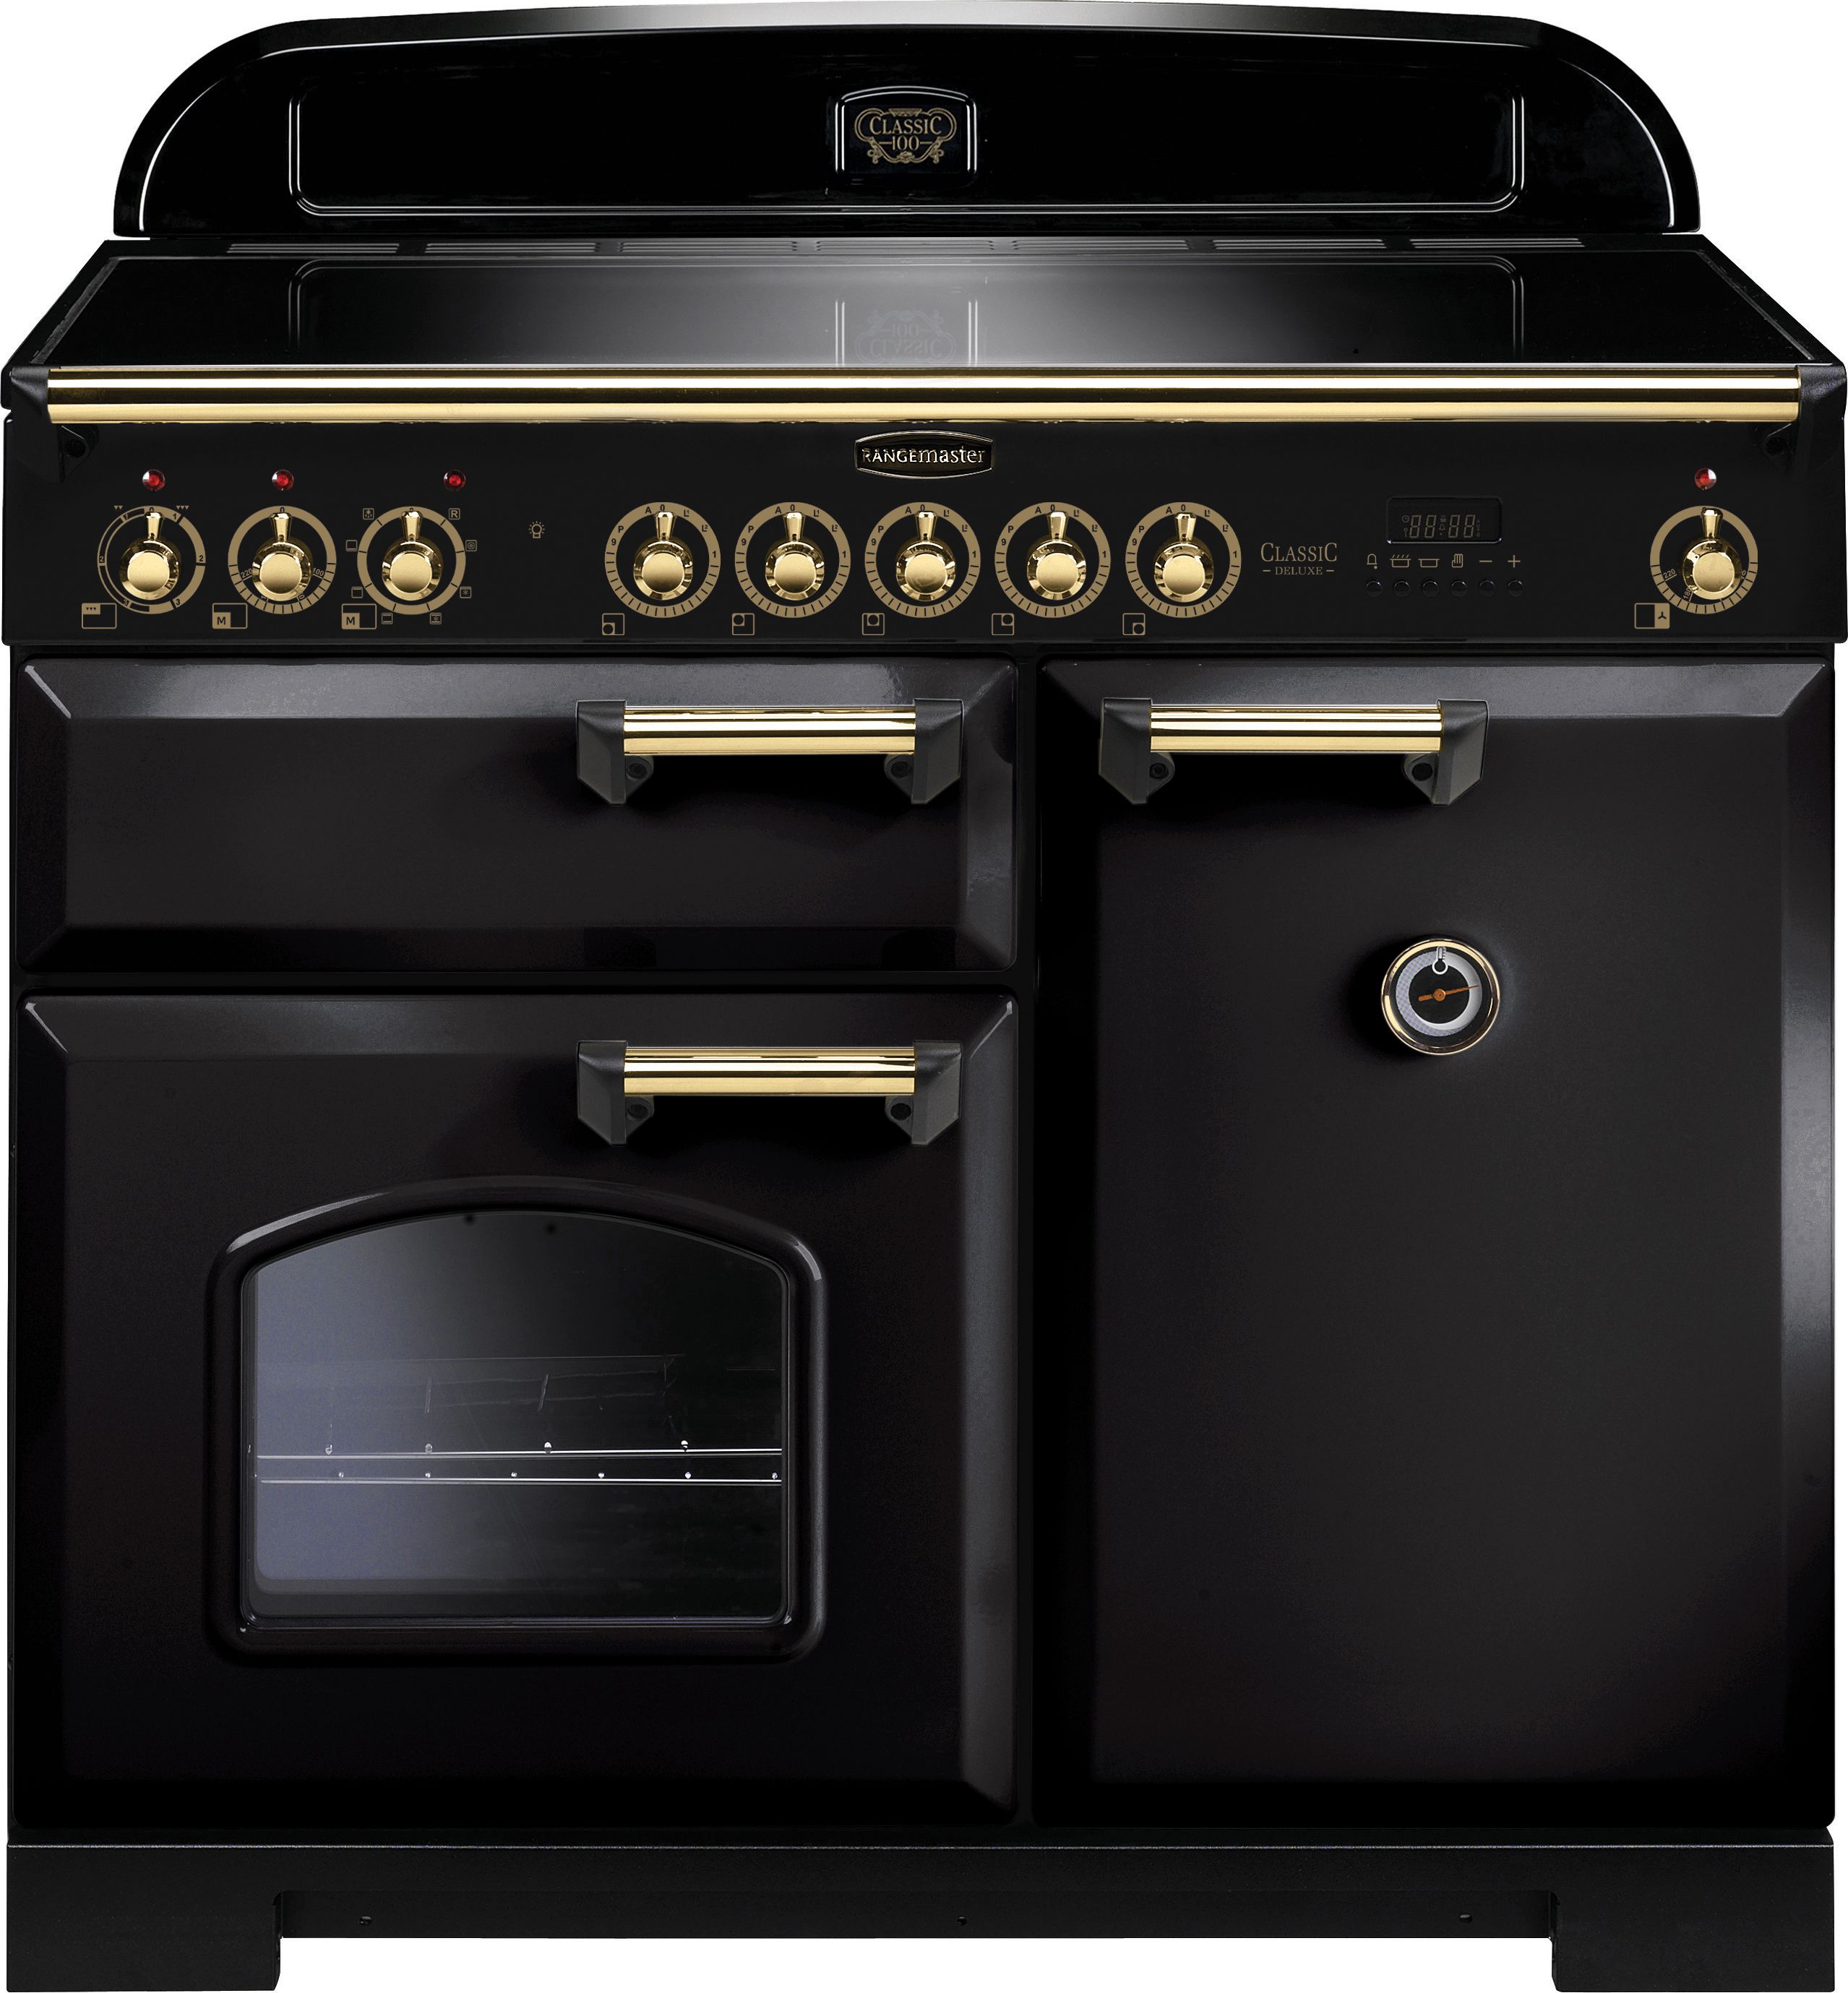 Rangemaster Classic Deluxe CDL100EIBL/B 100cm Electric Range Cooker with Induction Hob - Black / Brass - A/A Rated, Black